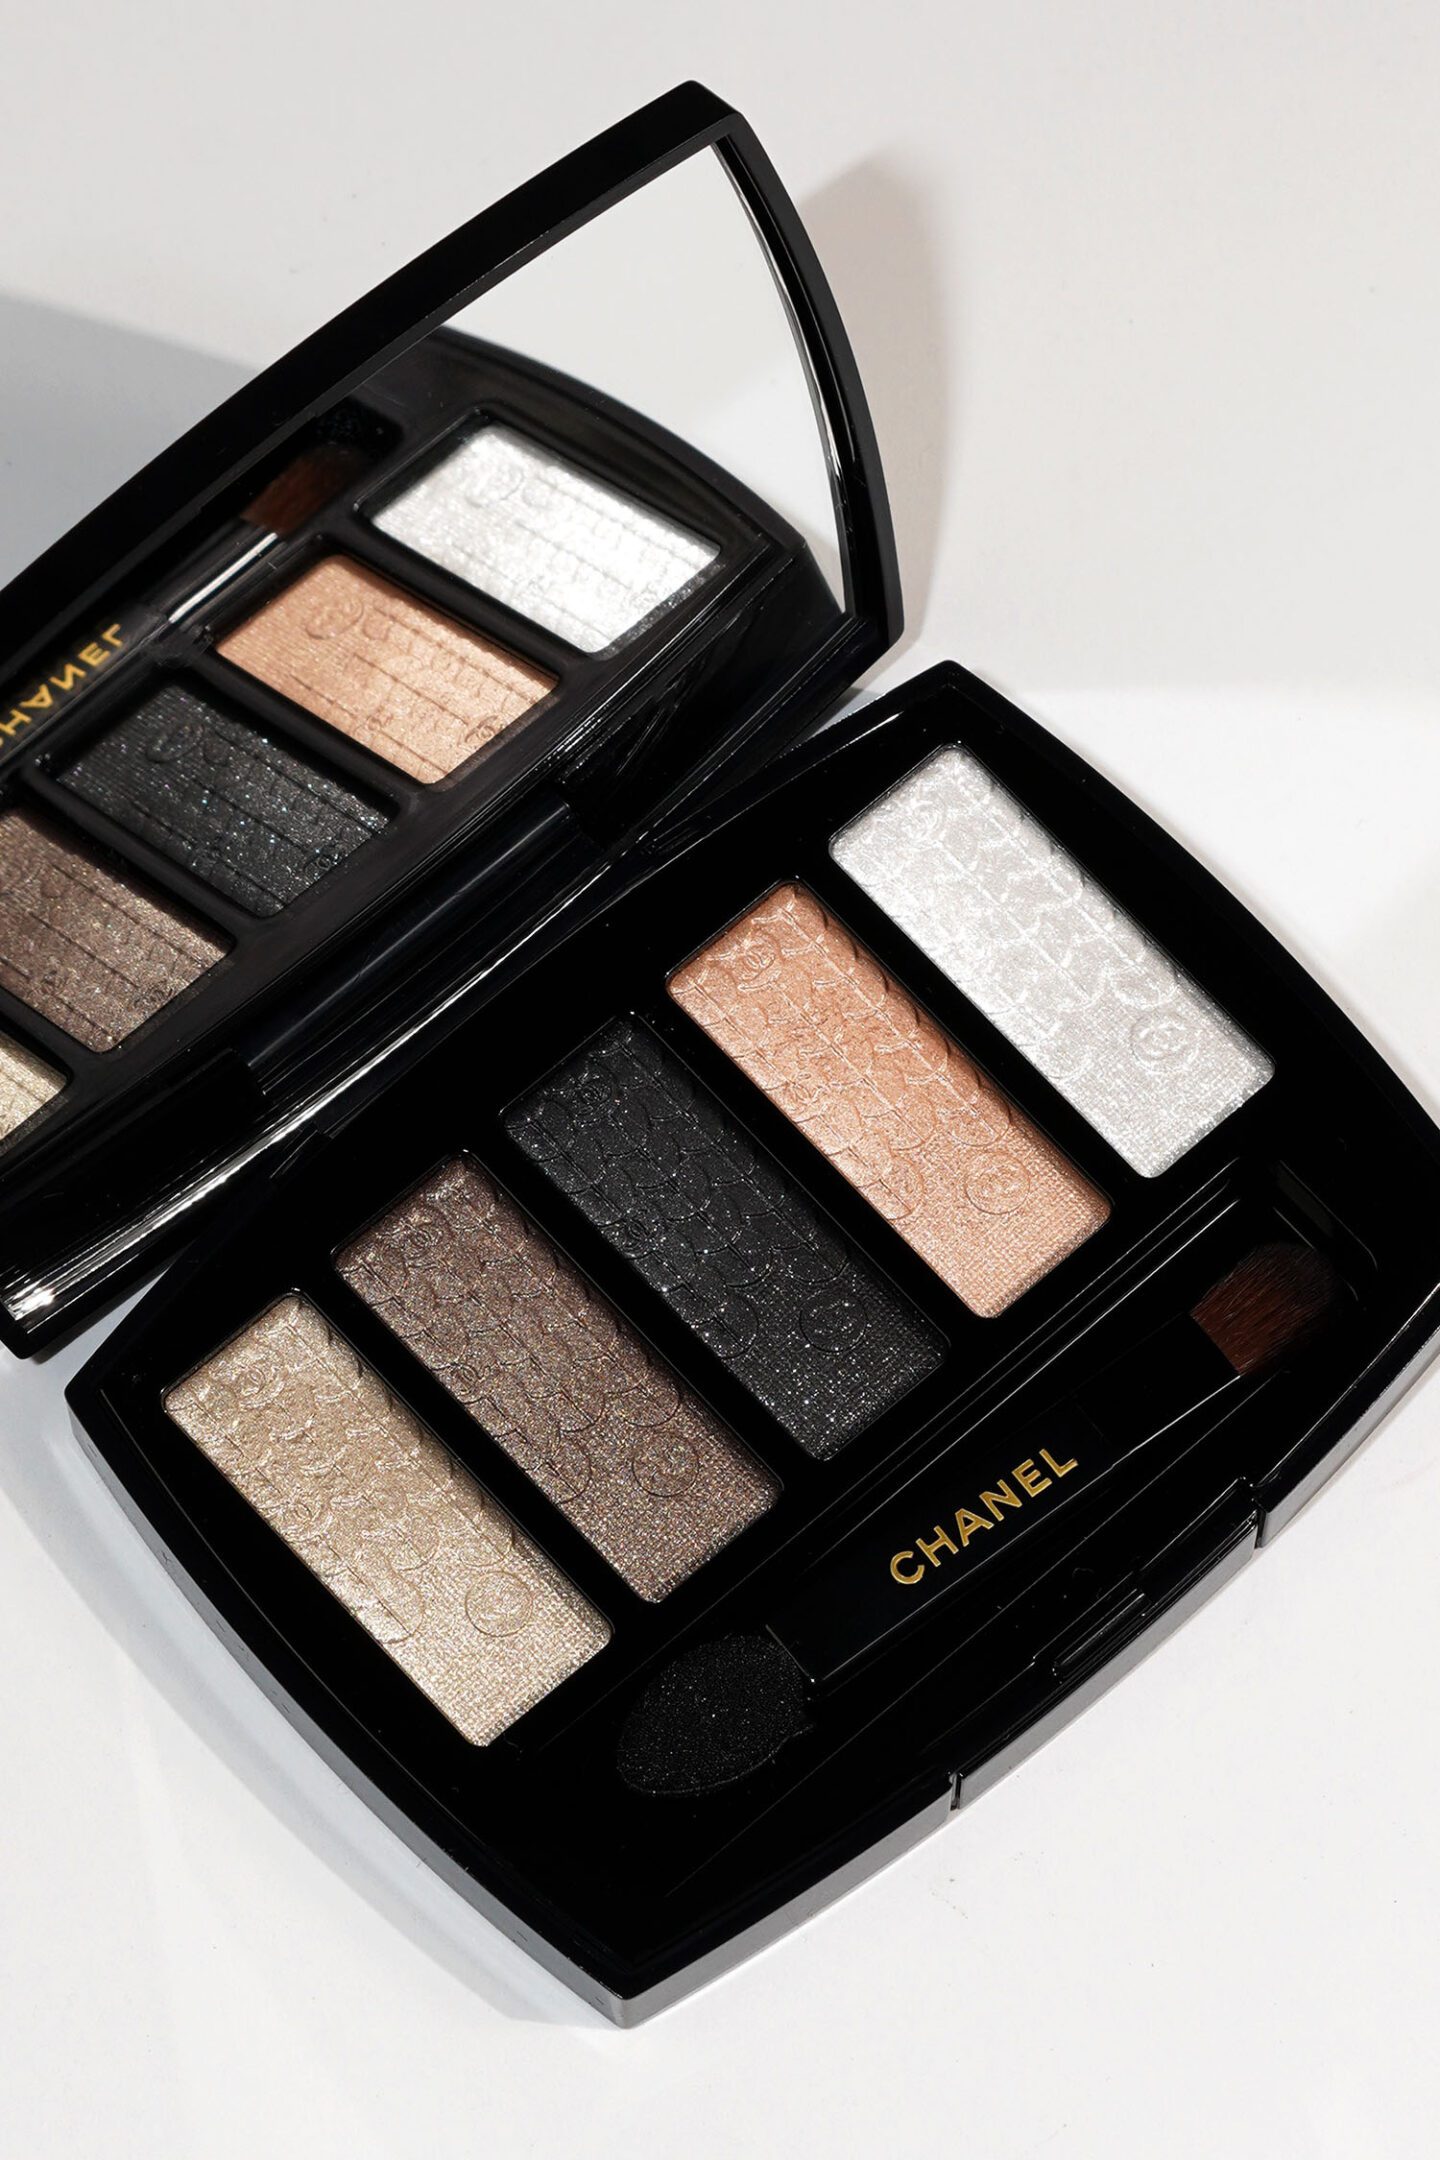 Chanel Lumiere Graphique Eyeshadow Palette